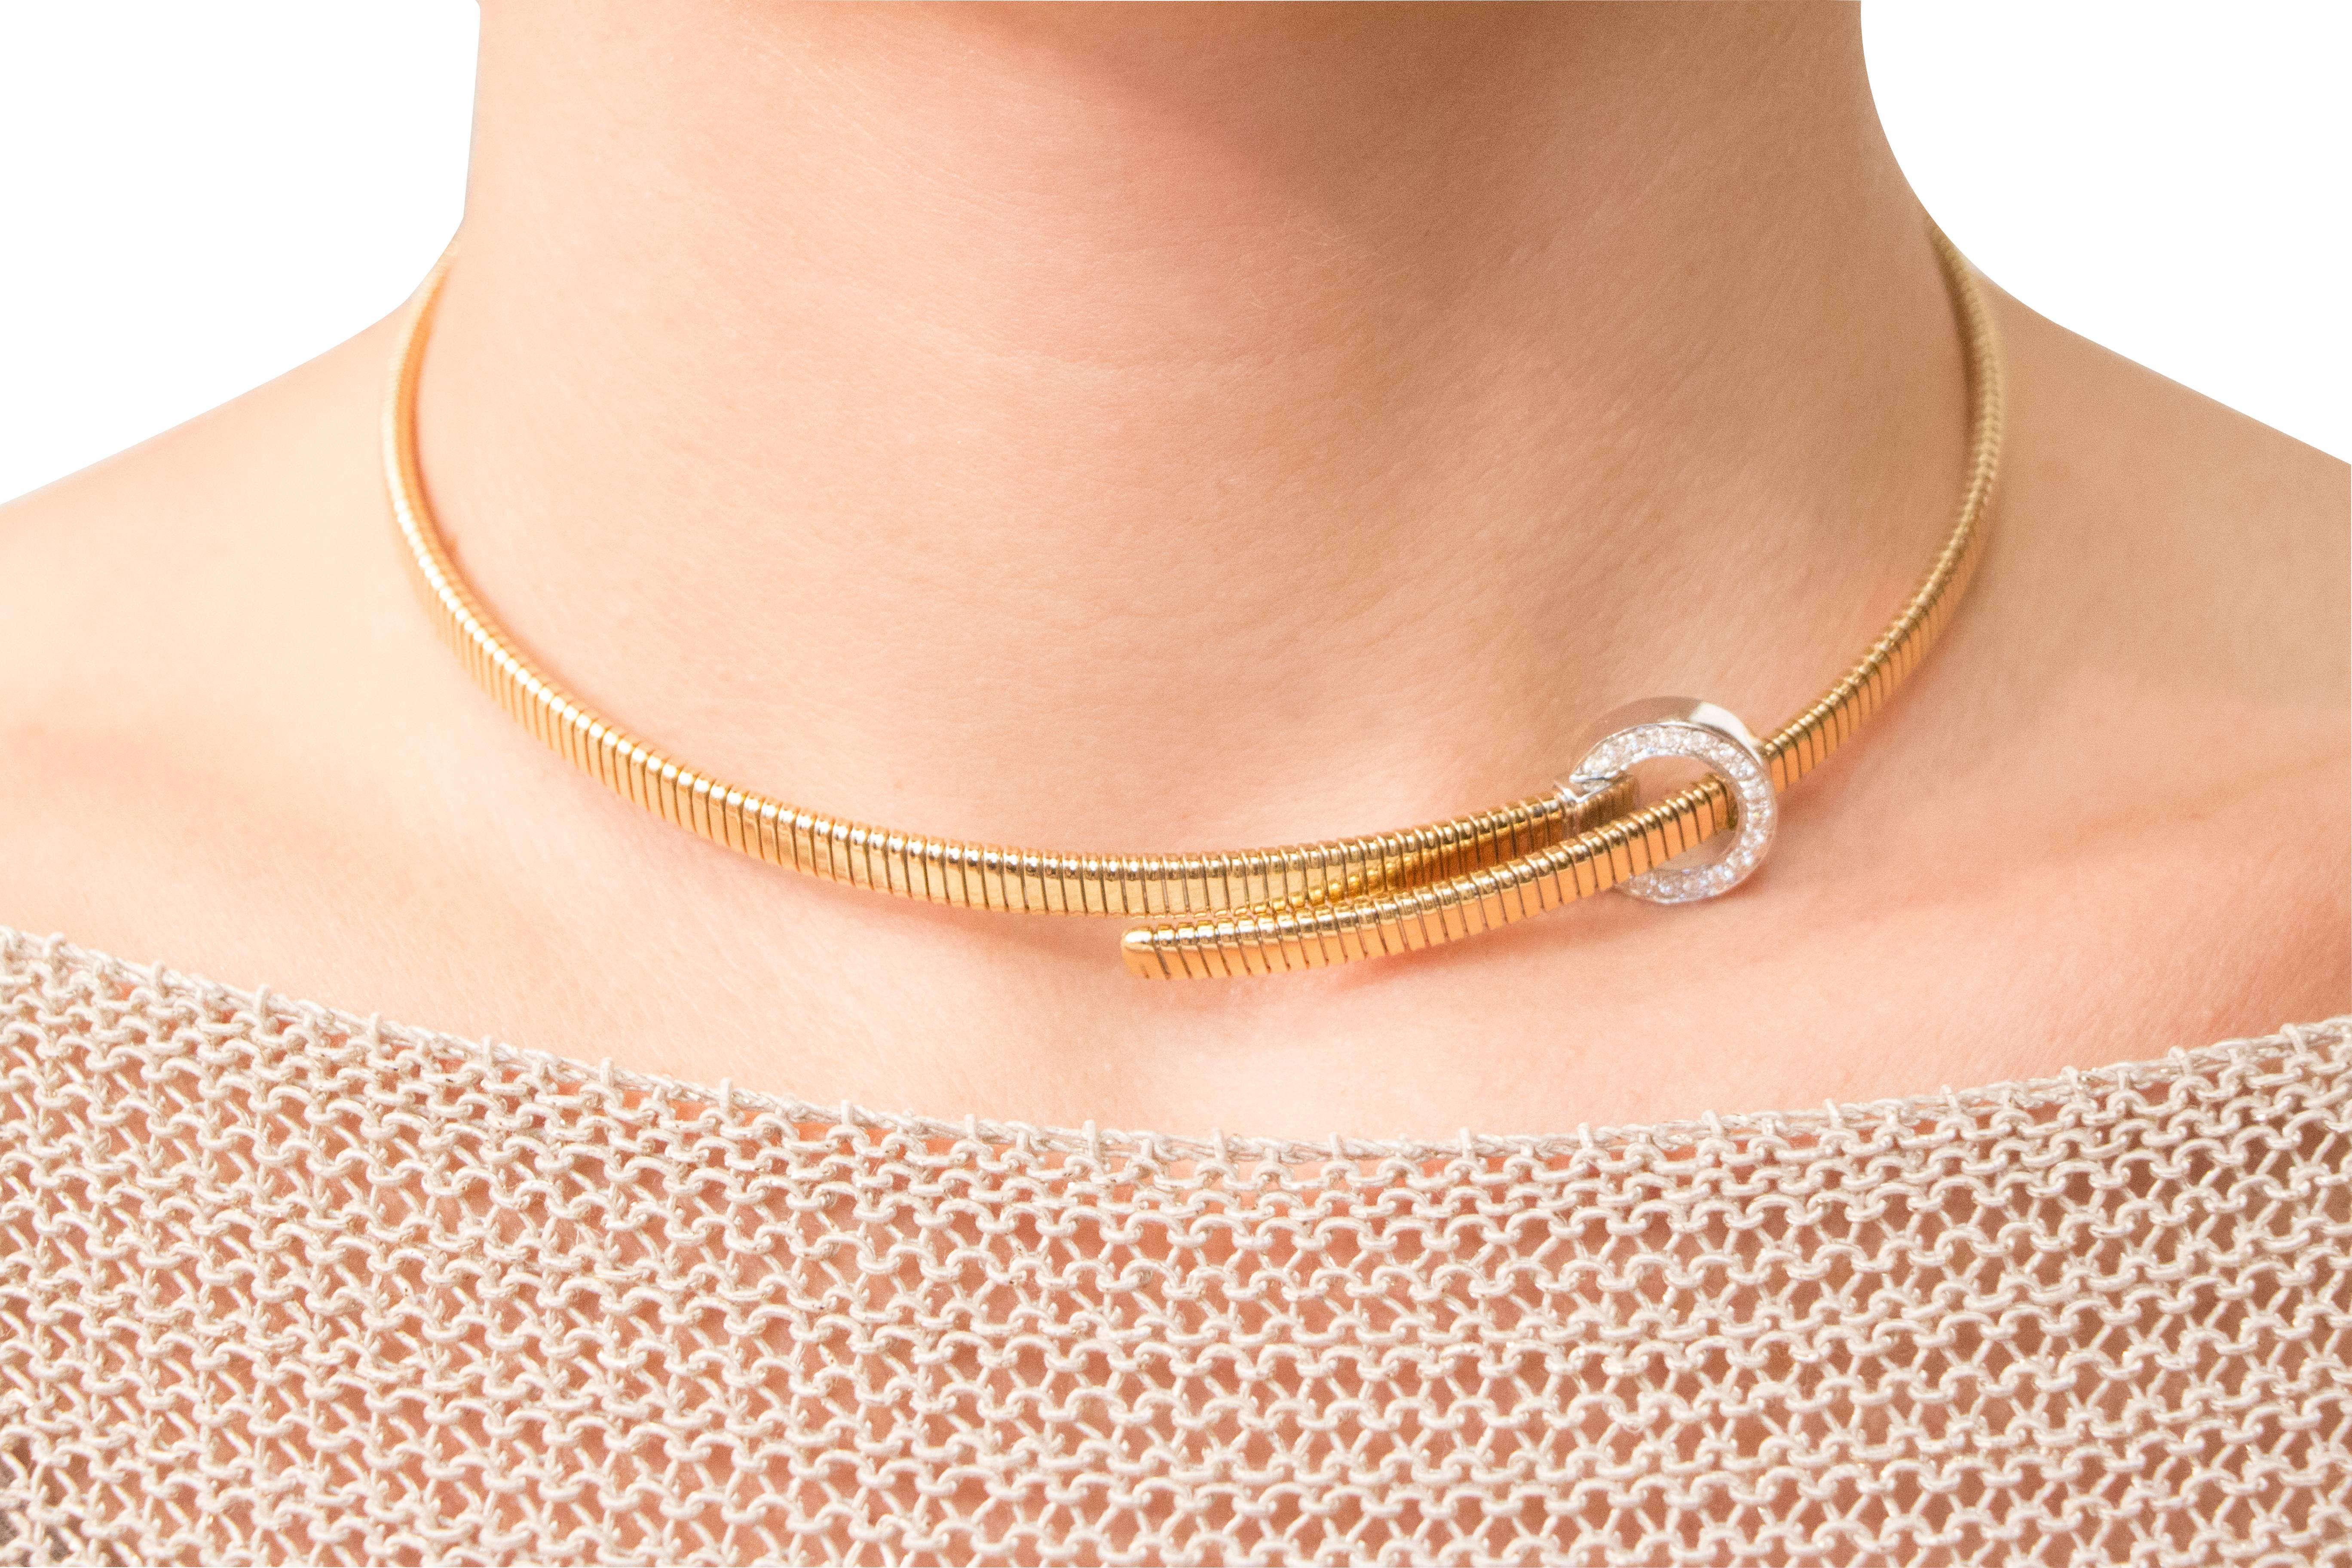 Jona design collection, hand crafted in Italy, tubogas 18k yellow gold belt choker necklace with a circle white gold buckle set with white diamonds.
Dimensions: H x 0.5 cm, Dm x 13 cm - H x 0.19 in., Dm x 5.11 in.
All Jona jewelry is new and has